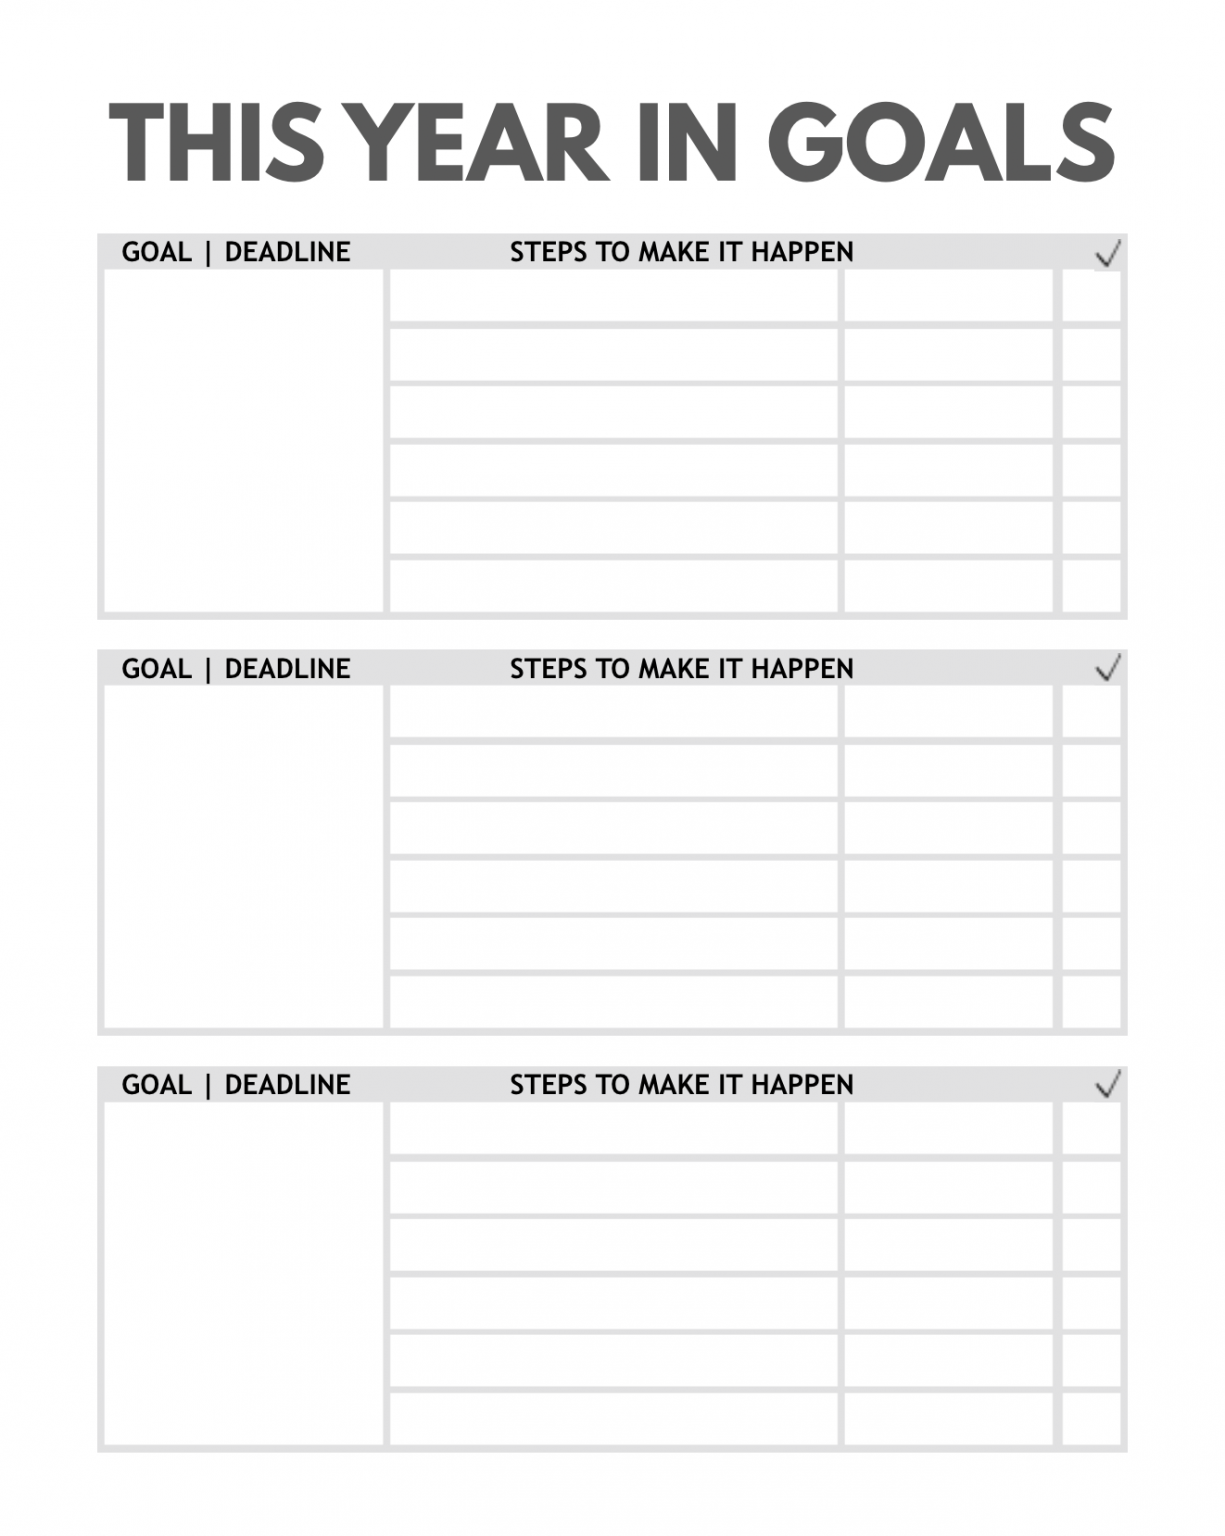 Goal Action Plan Undated Agenda to Track Your Goals for the Year